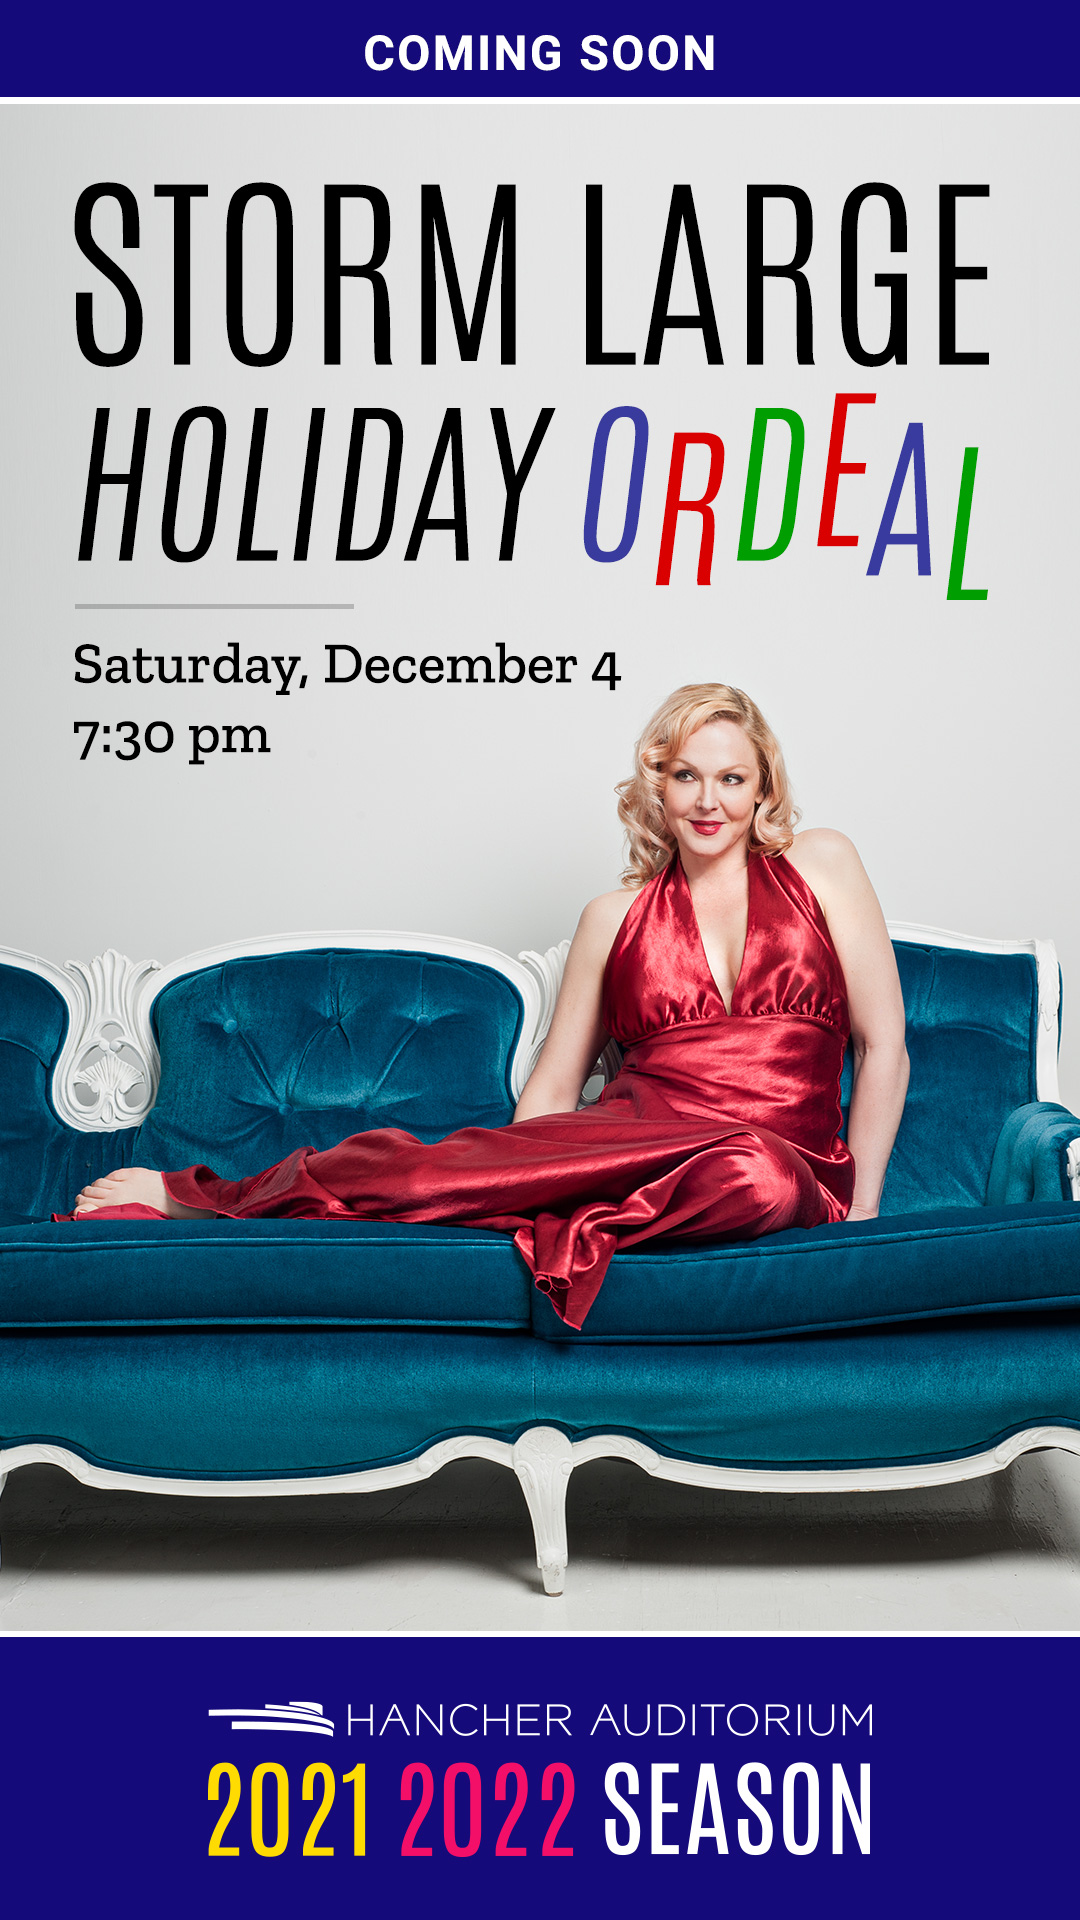 Storm Large, "Holiday Ordeal" - Coming Soon